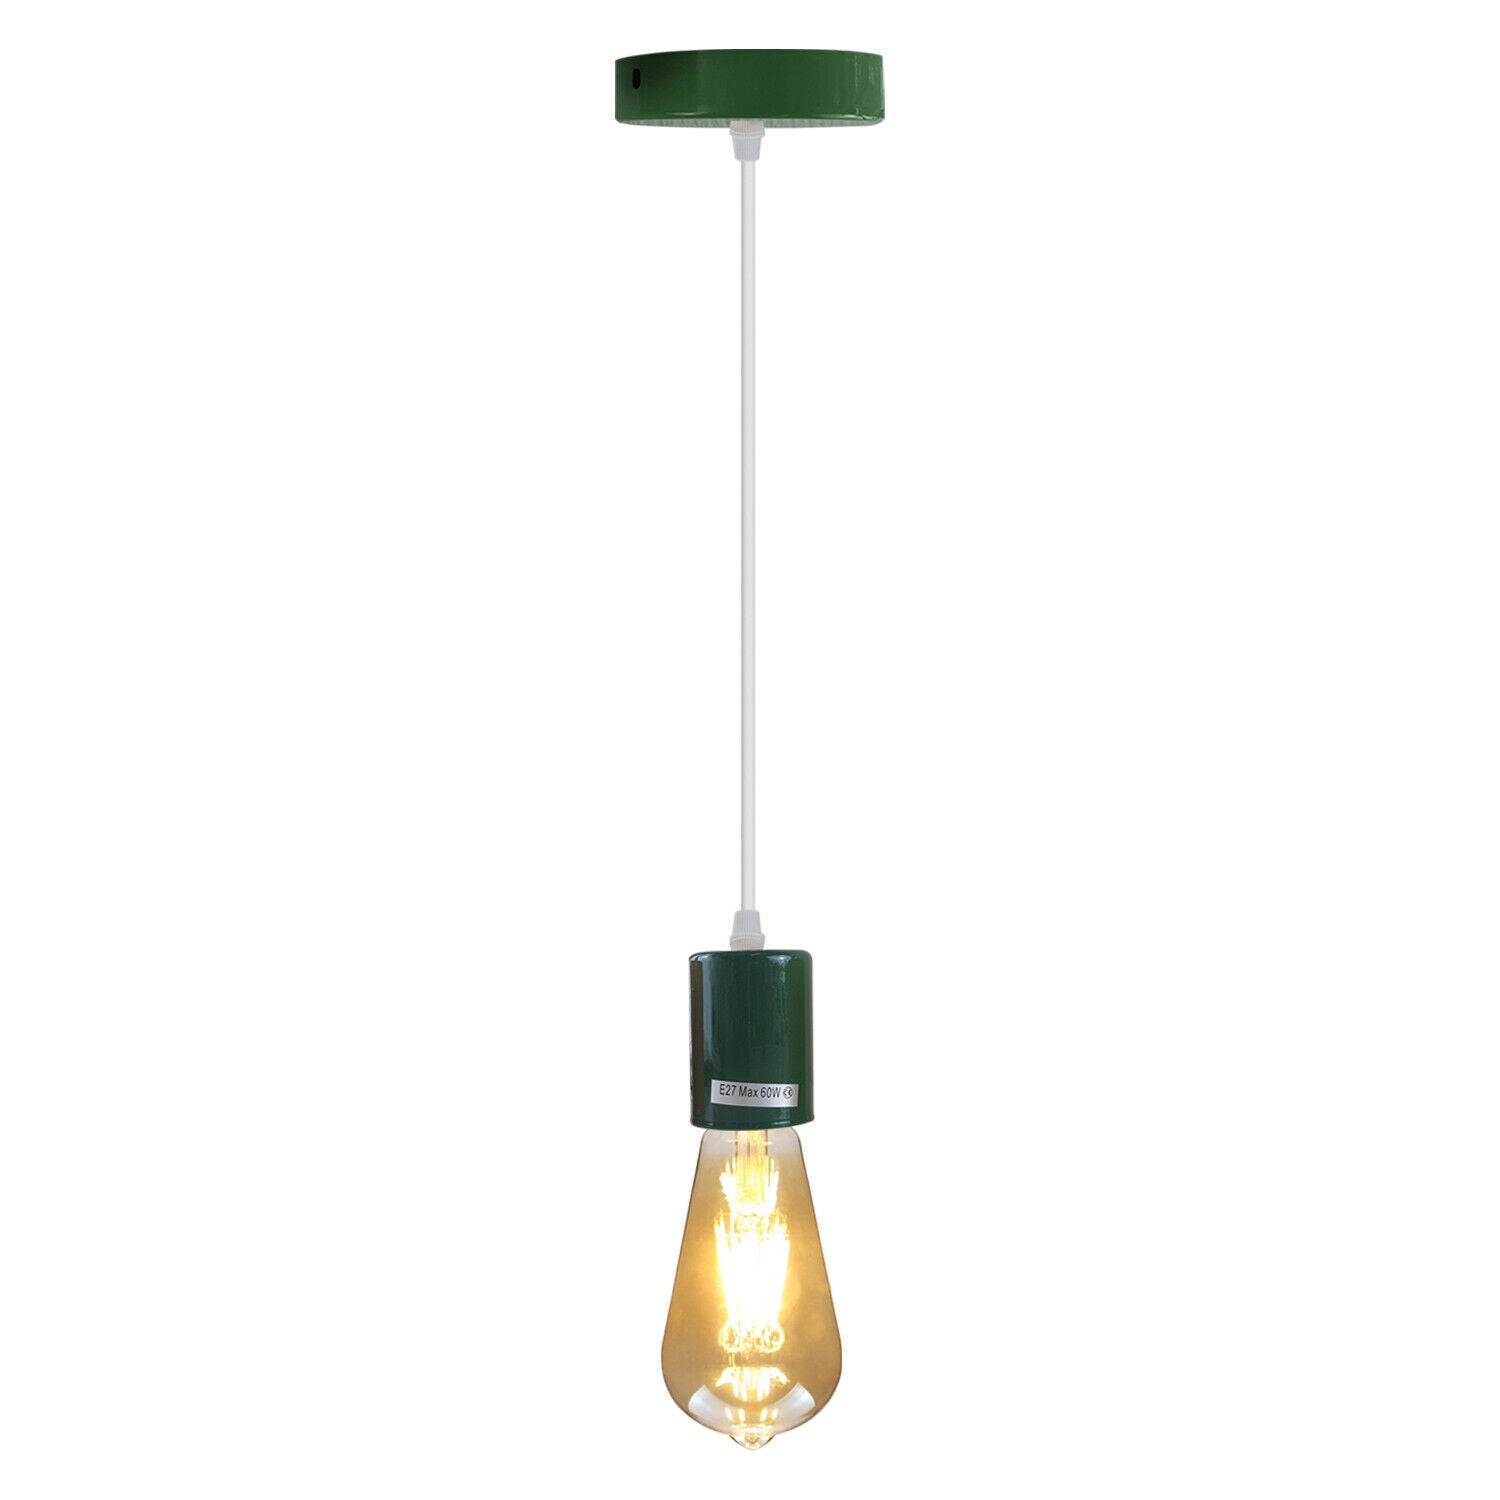 Green Industrial Metal Ceiling Fitting E27 Pendant Lamp Holders